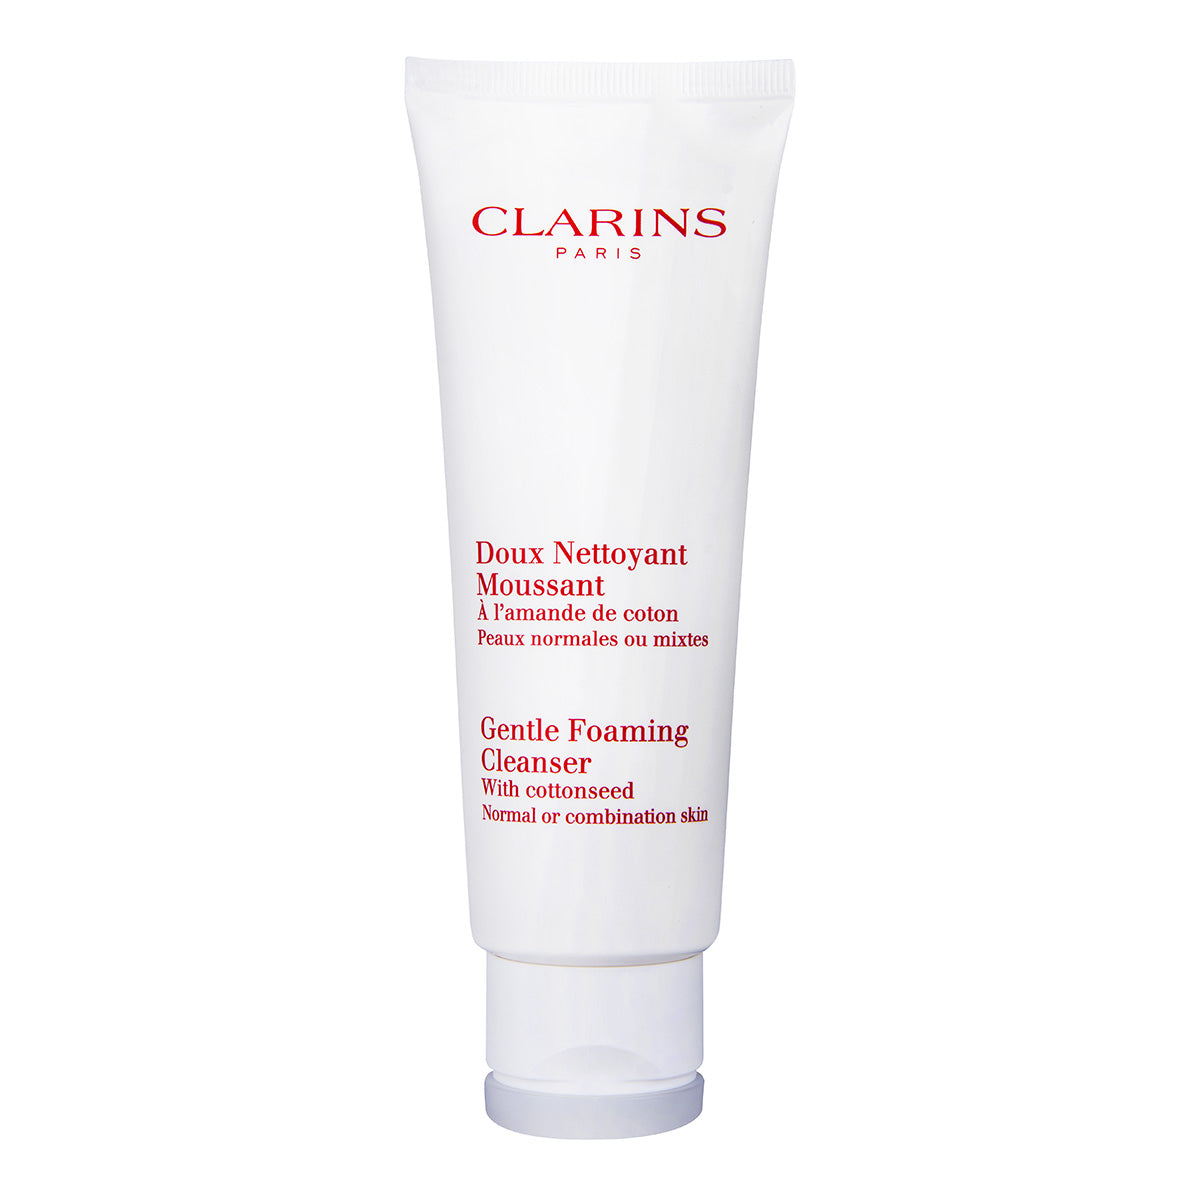 Clarins - Gentle Foaming Cleanser - Combination or Oily Skin (125ml)